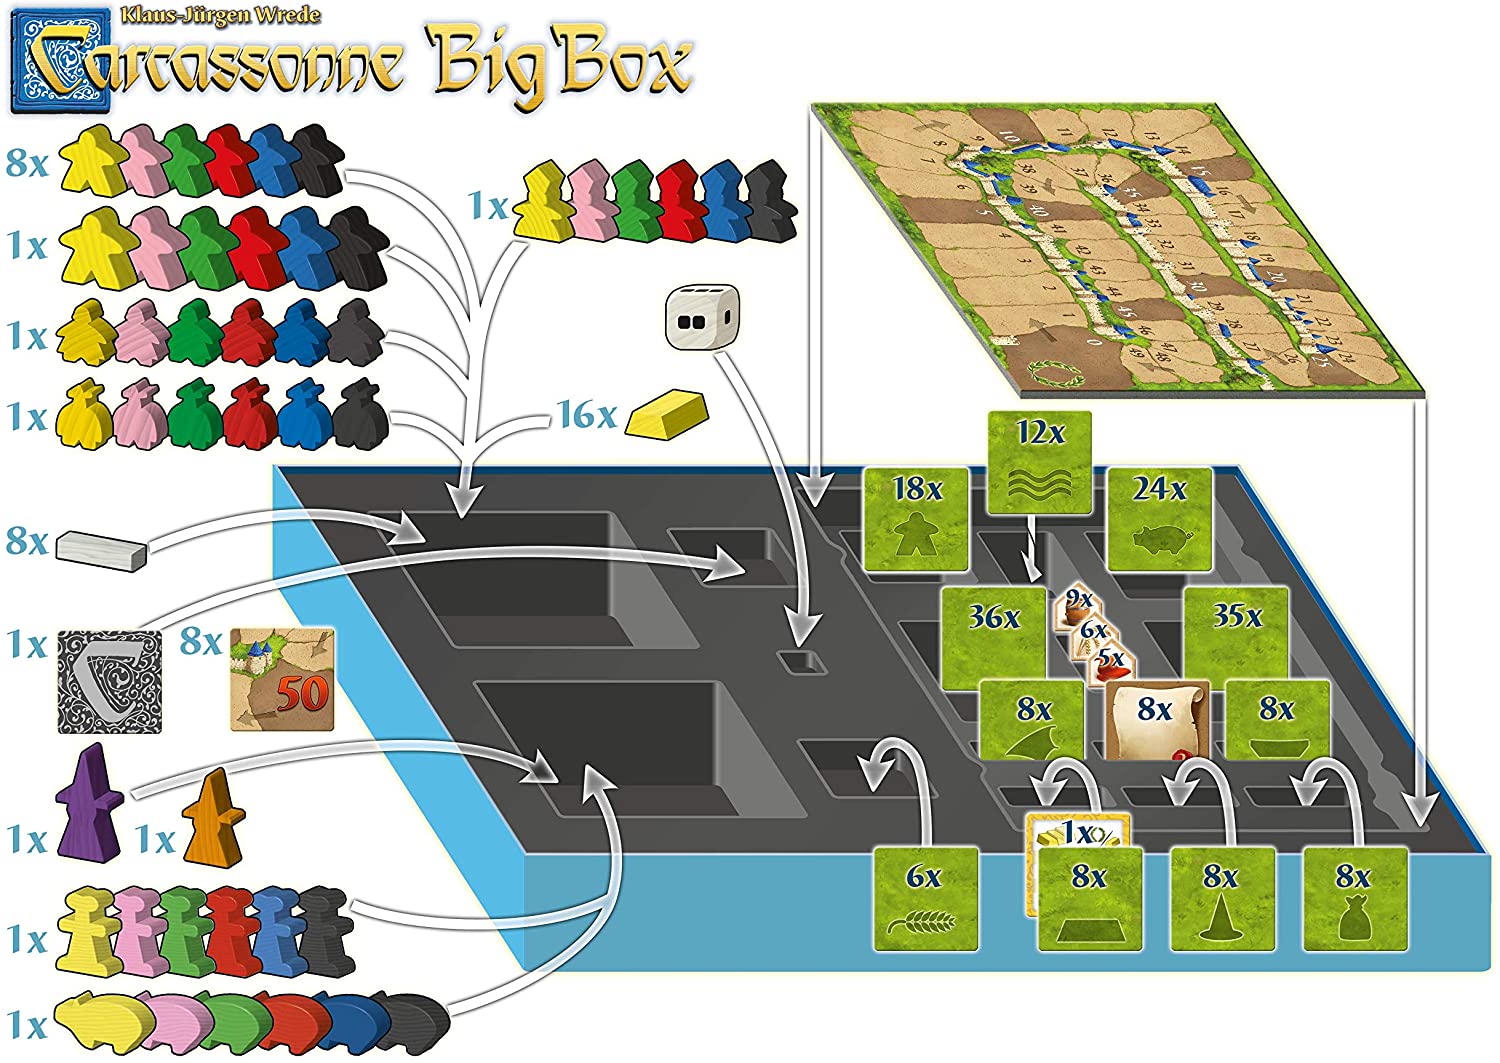 Carcassonne Big Box 6 (German Import, Supplied with English rules